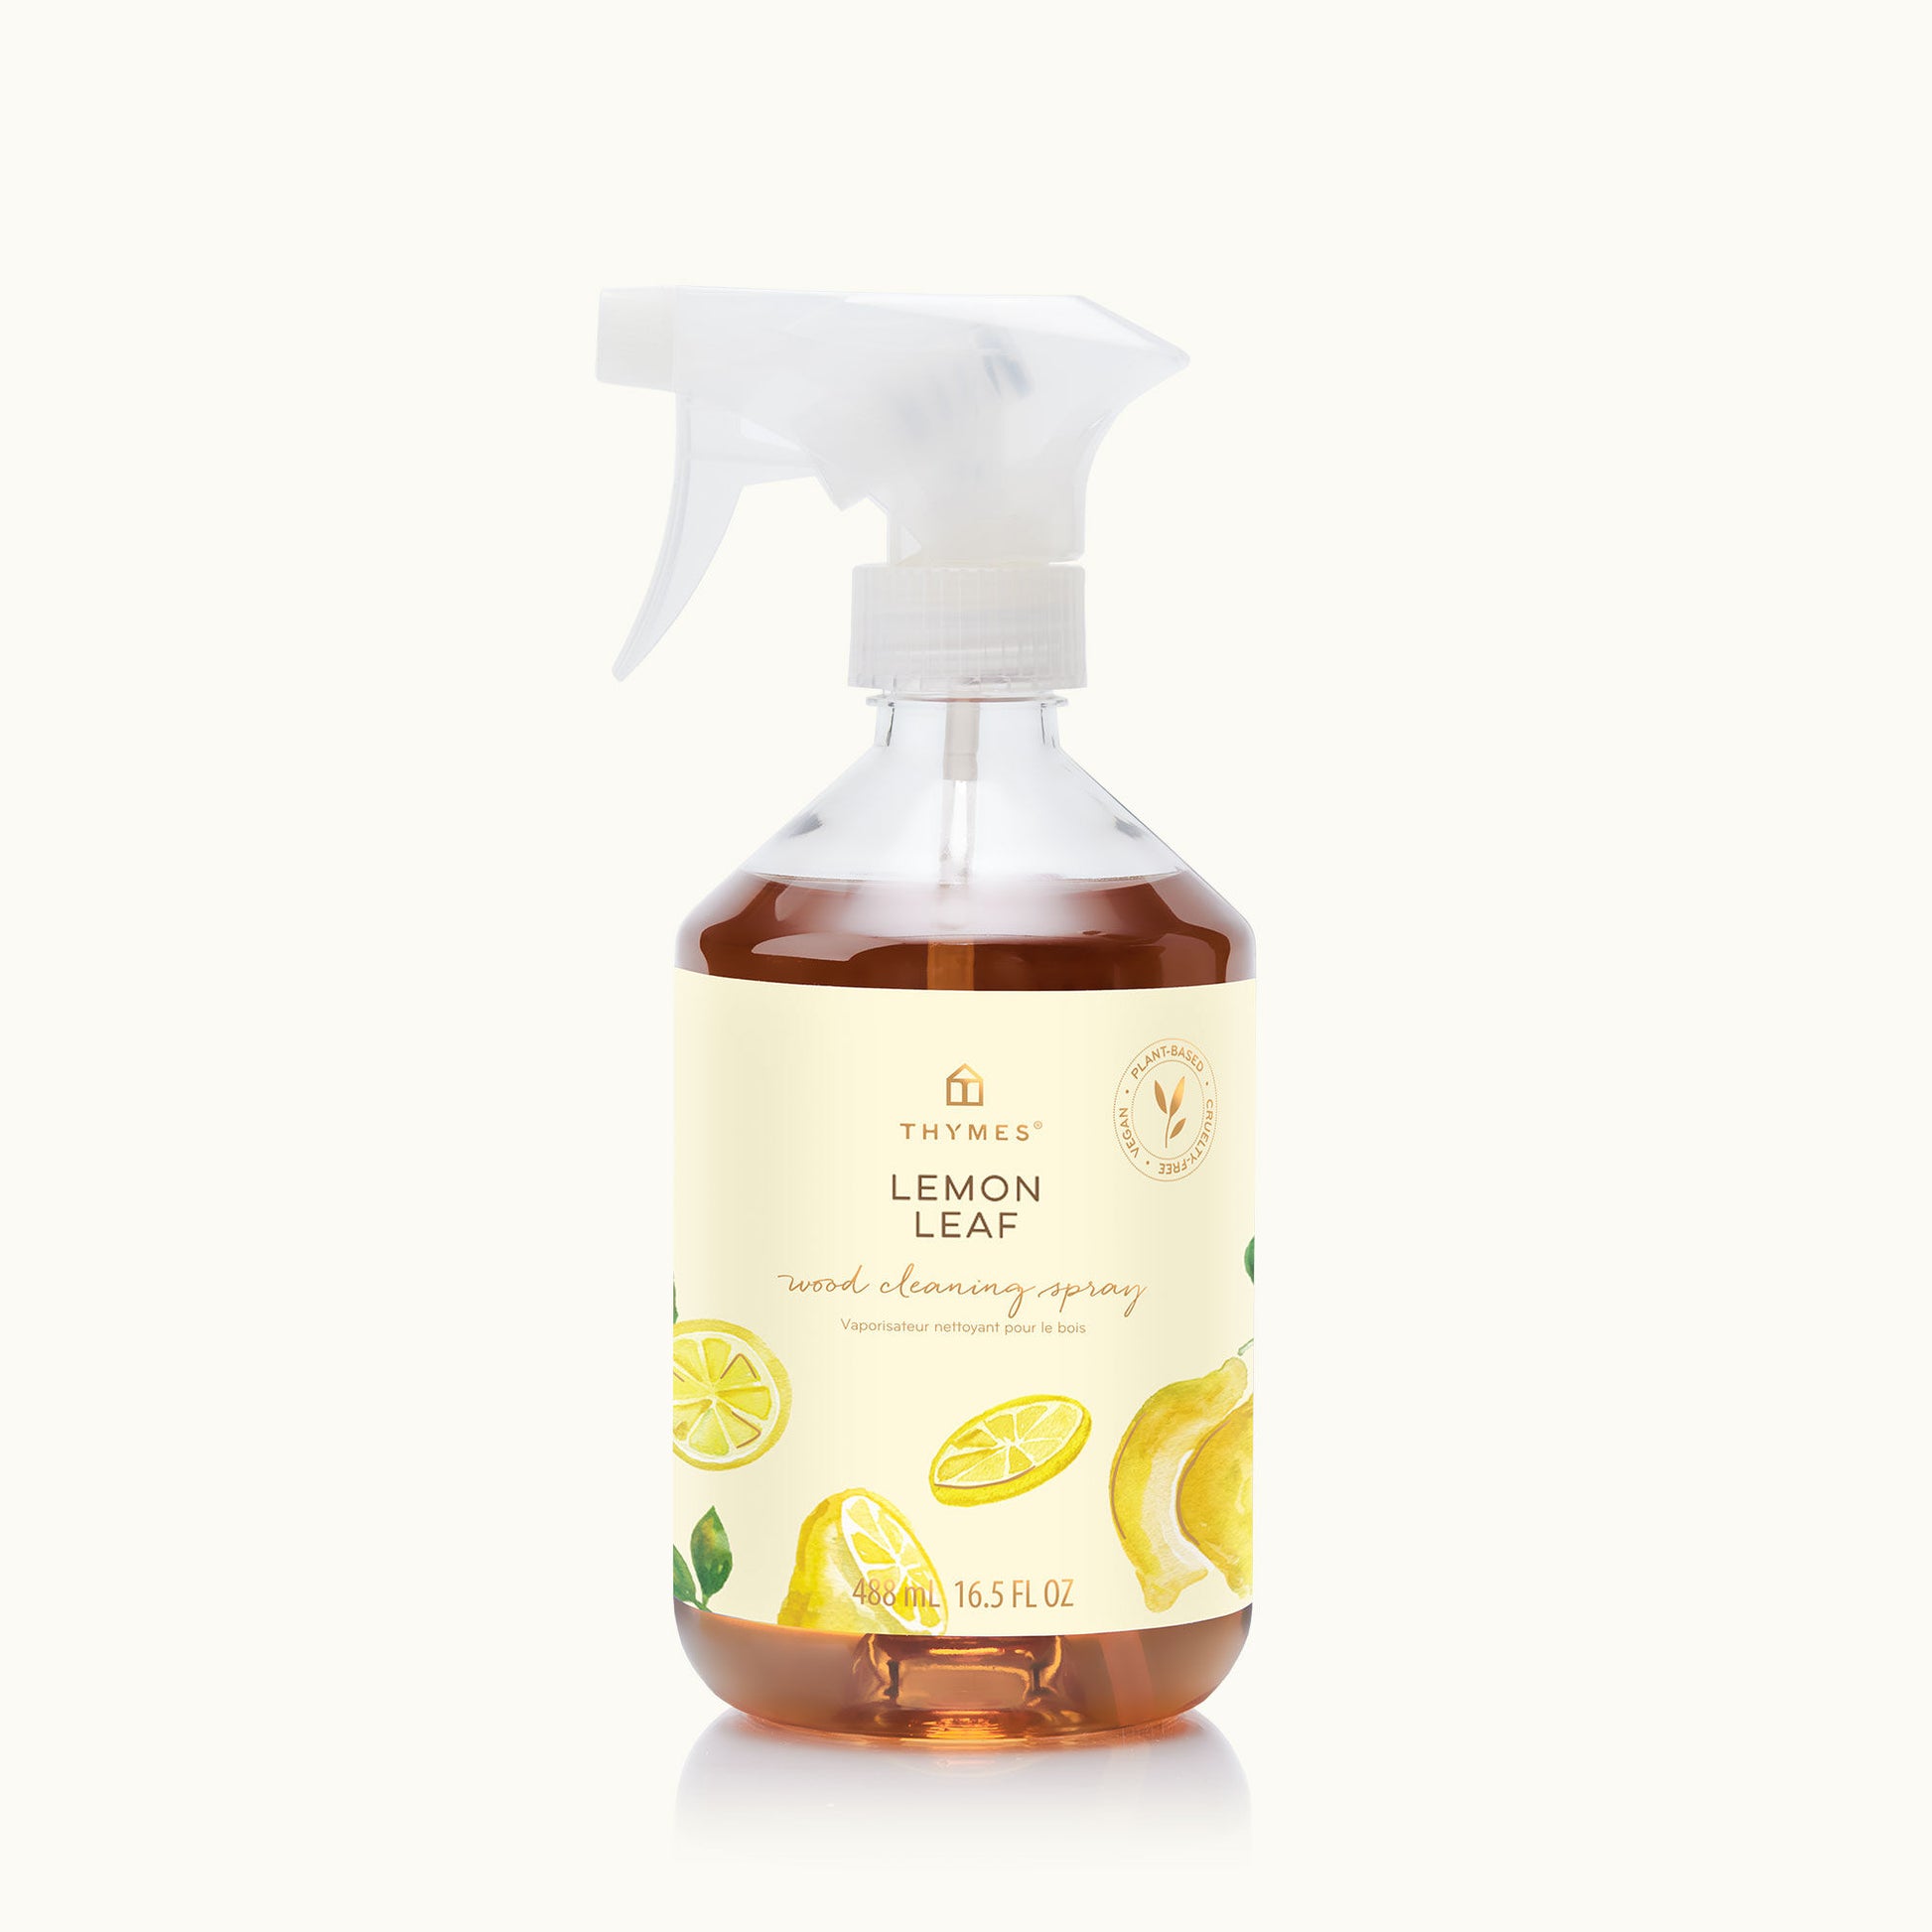 Lemon Leaf Wood Cleaning Spray Gifts Thymes   